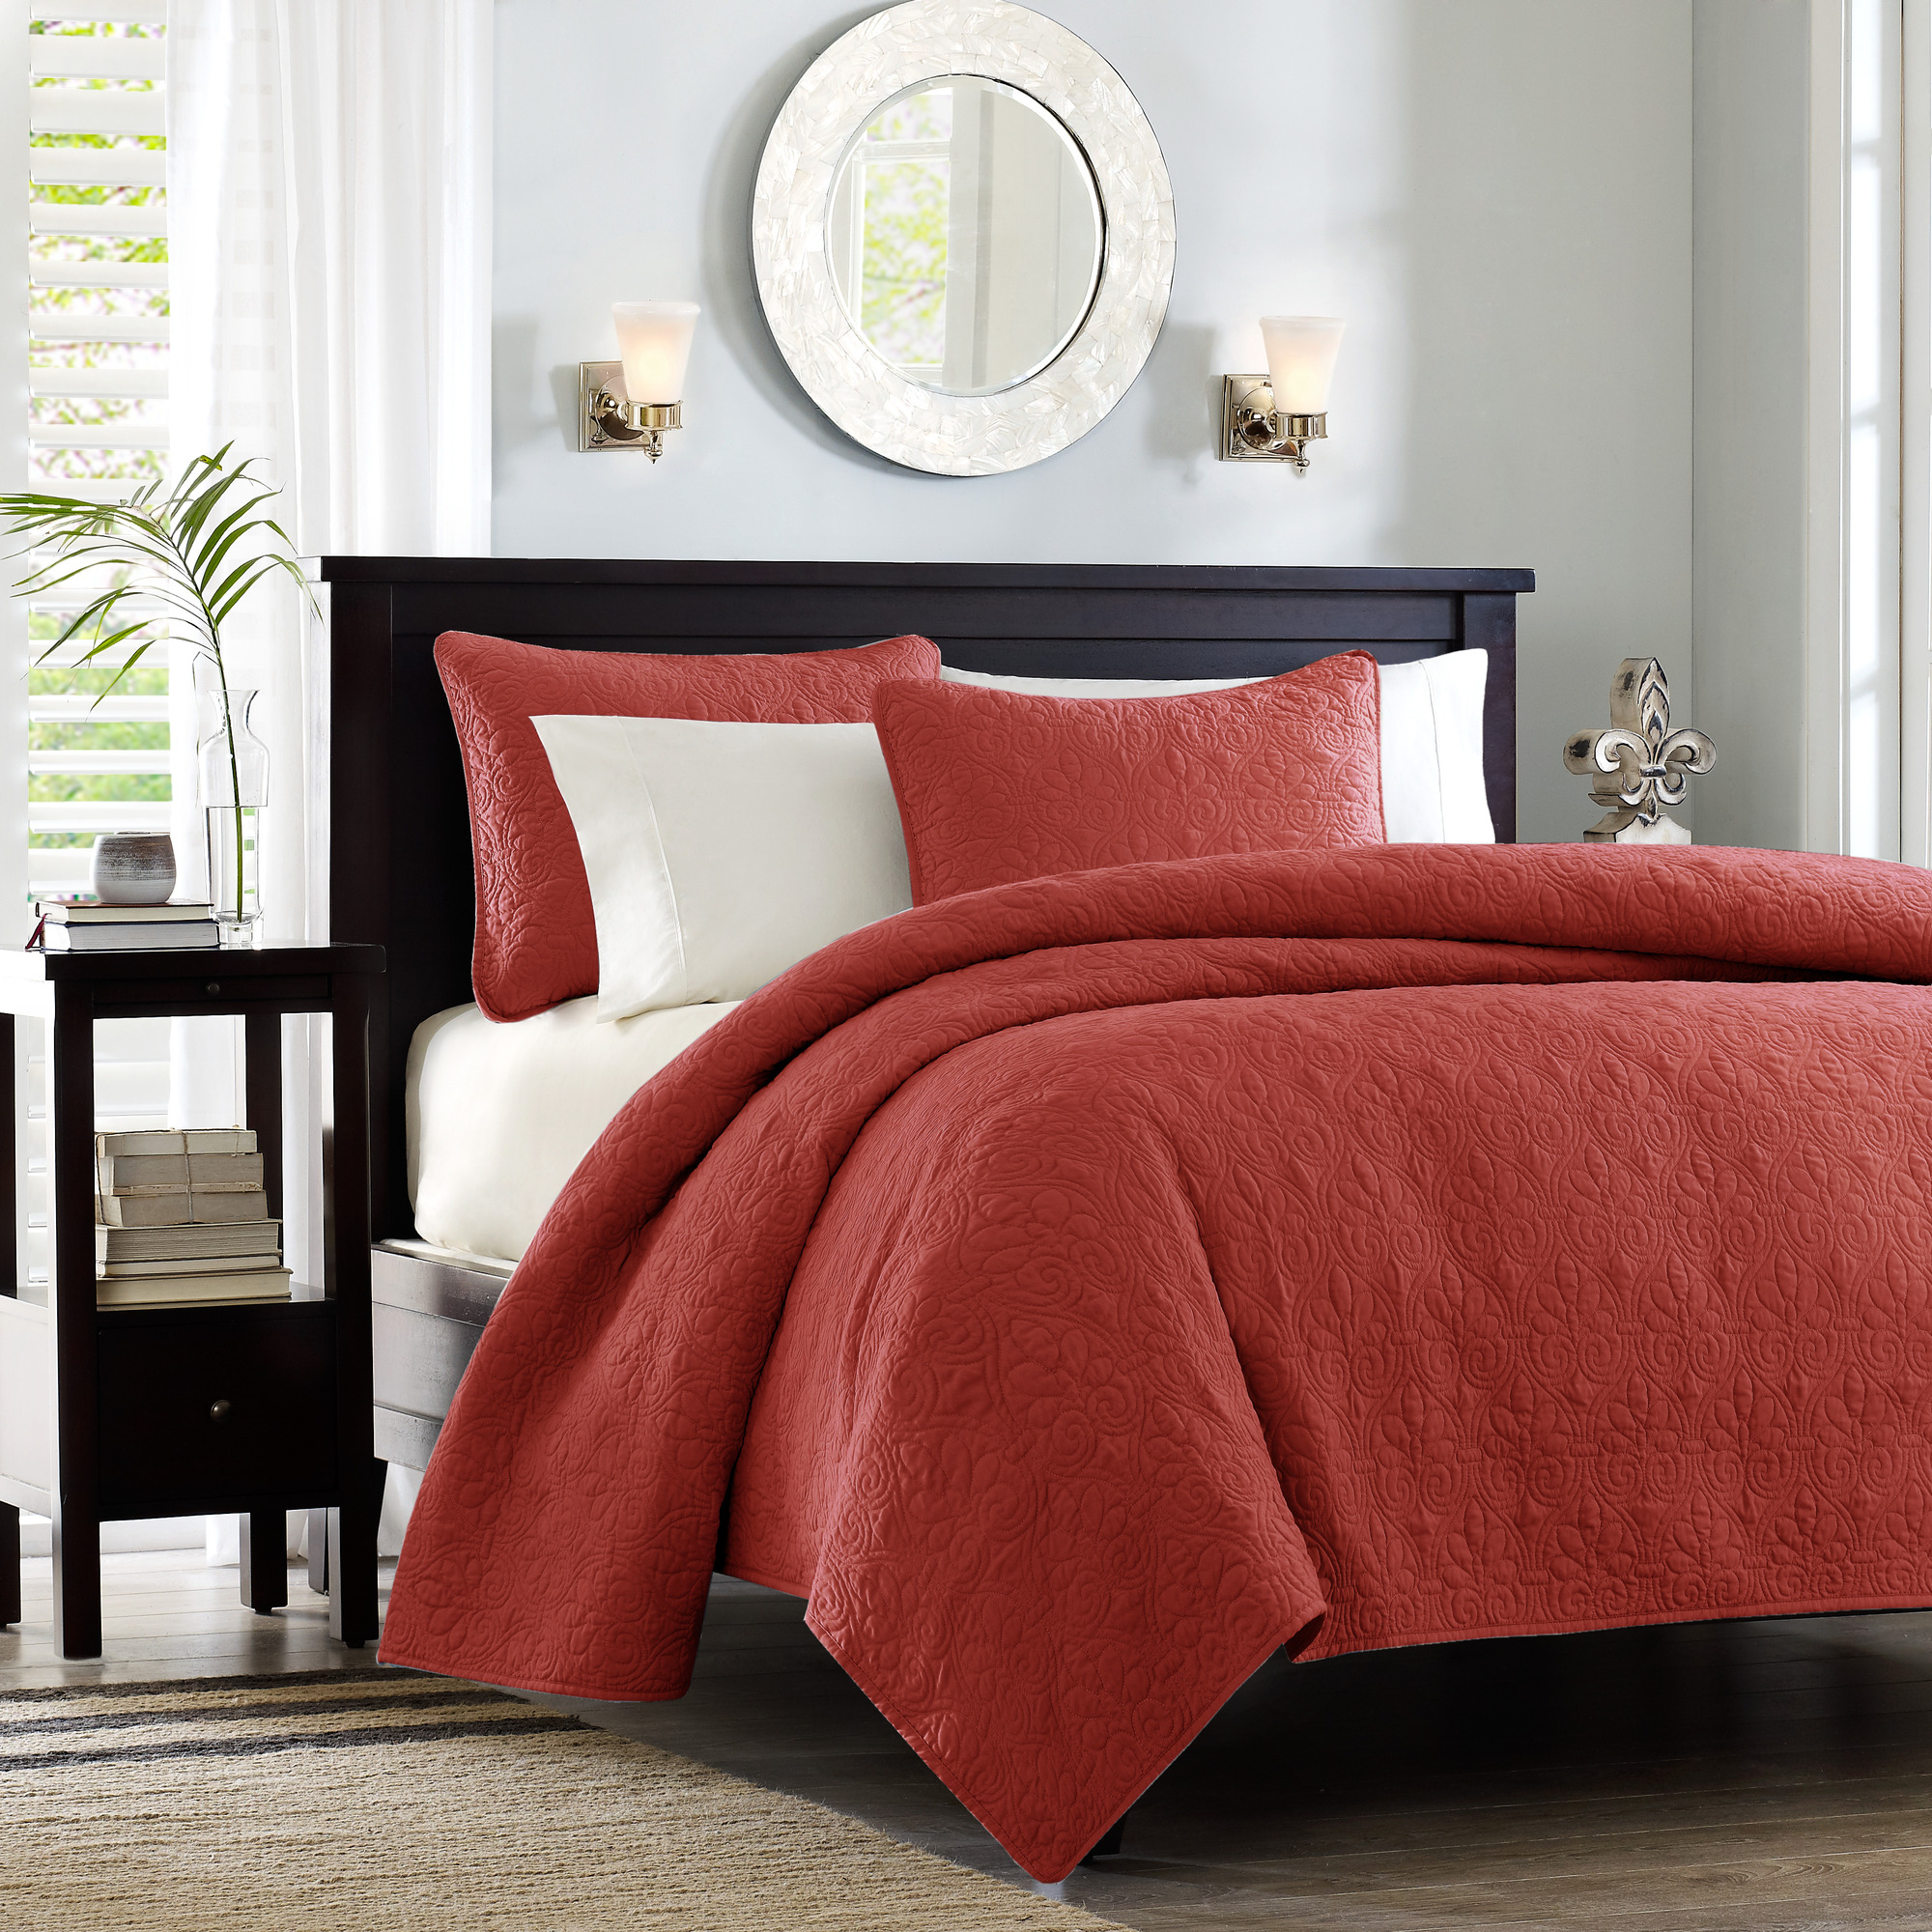 Home Essence Vancouver Super Soft Reversible Coverlet Set, King/Cal King, Red - image 1 of 14